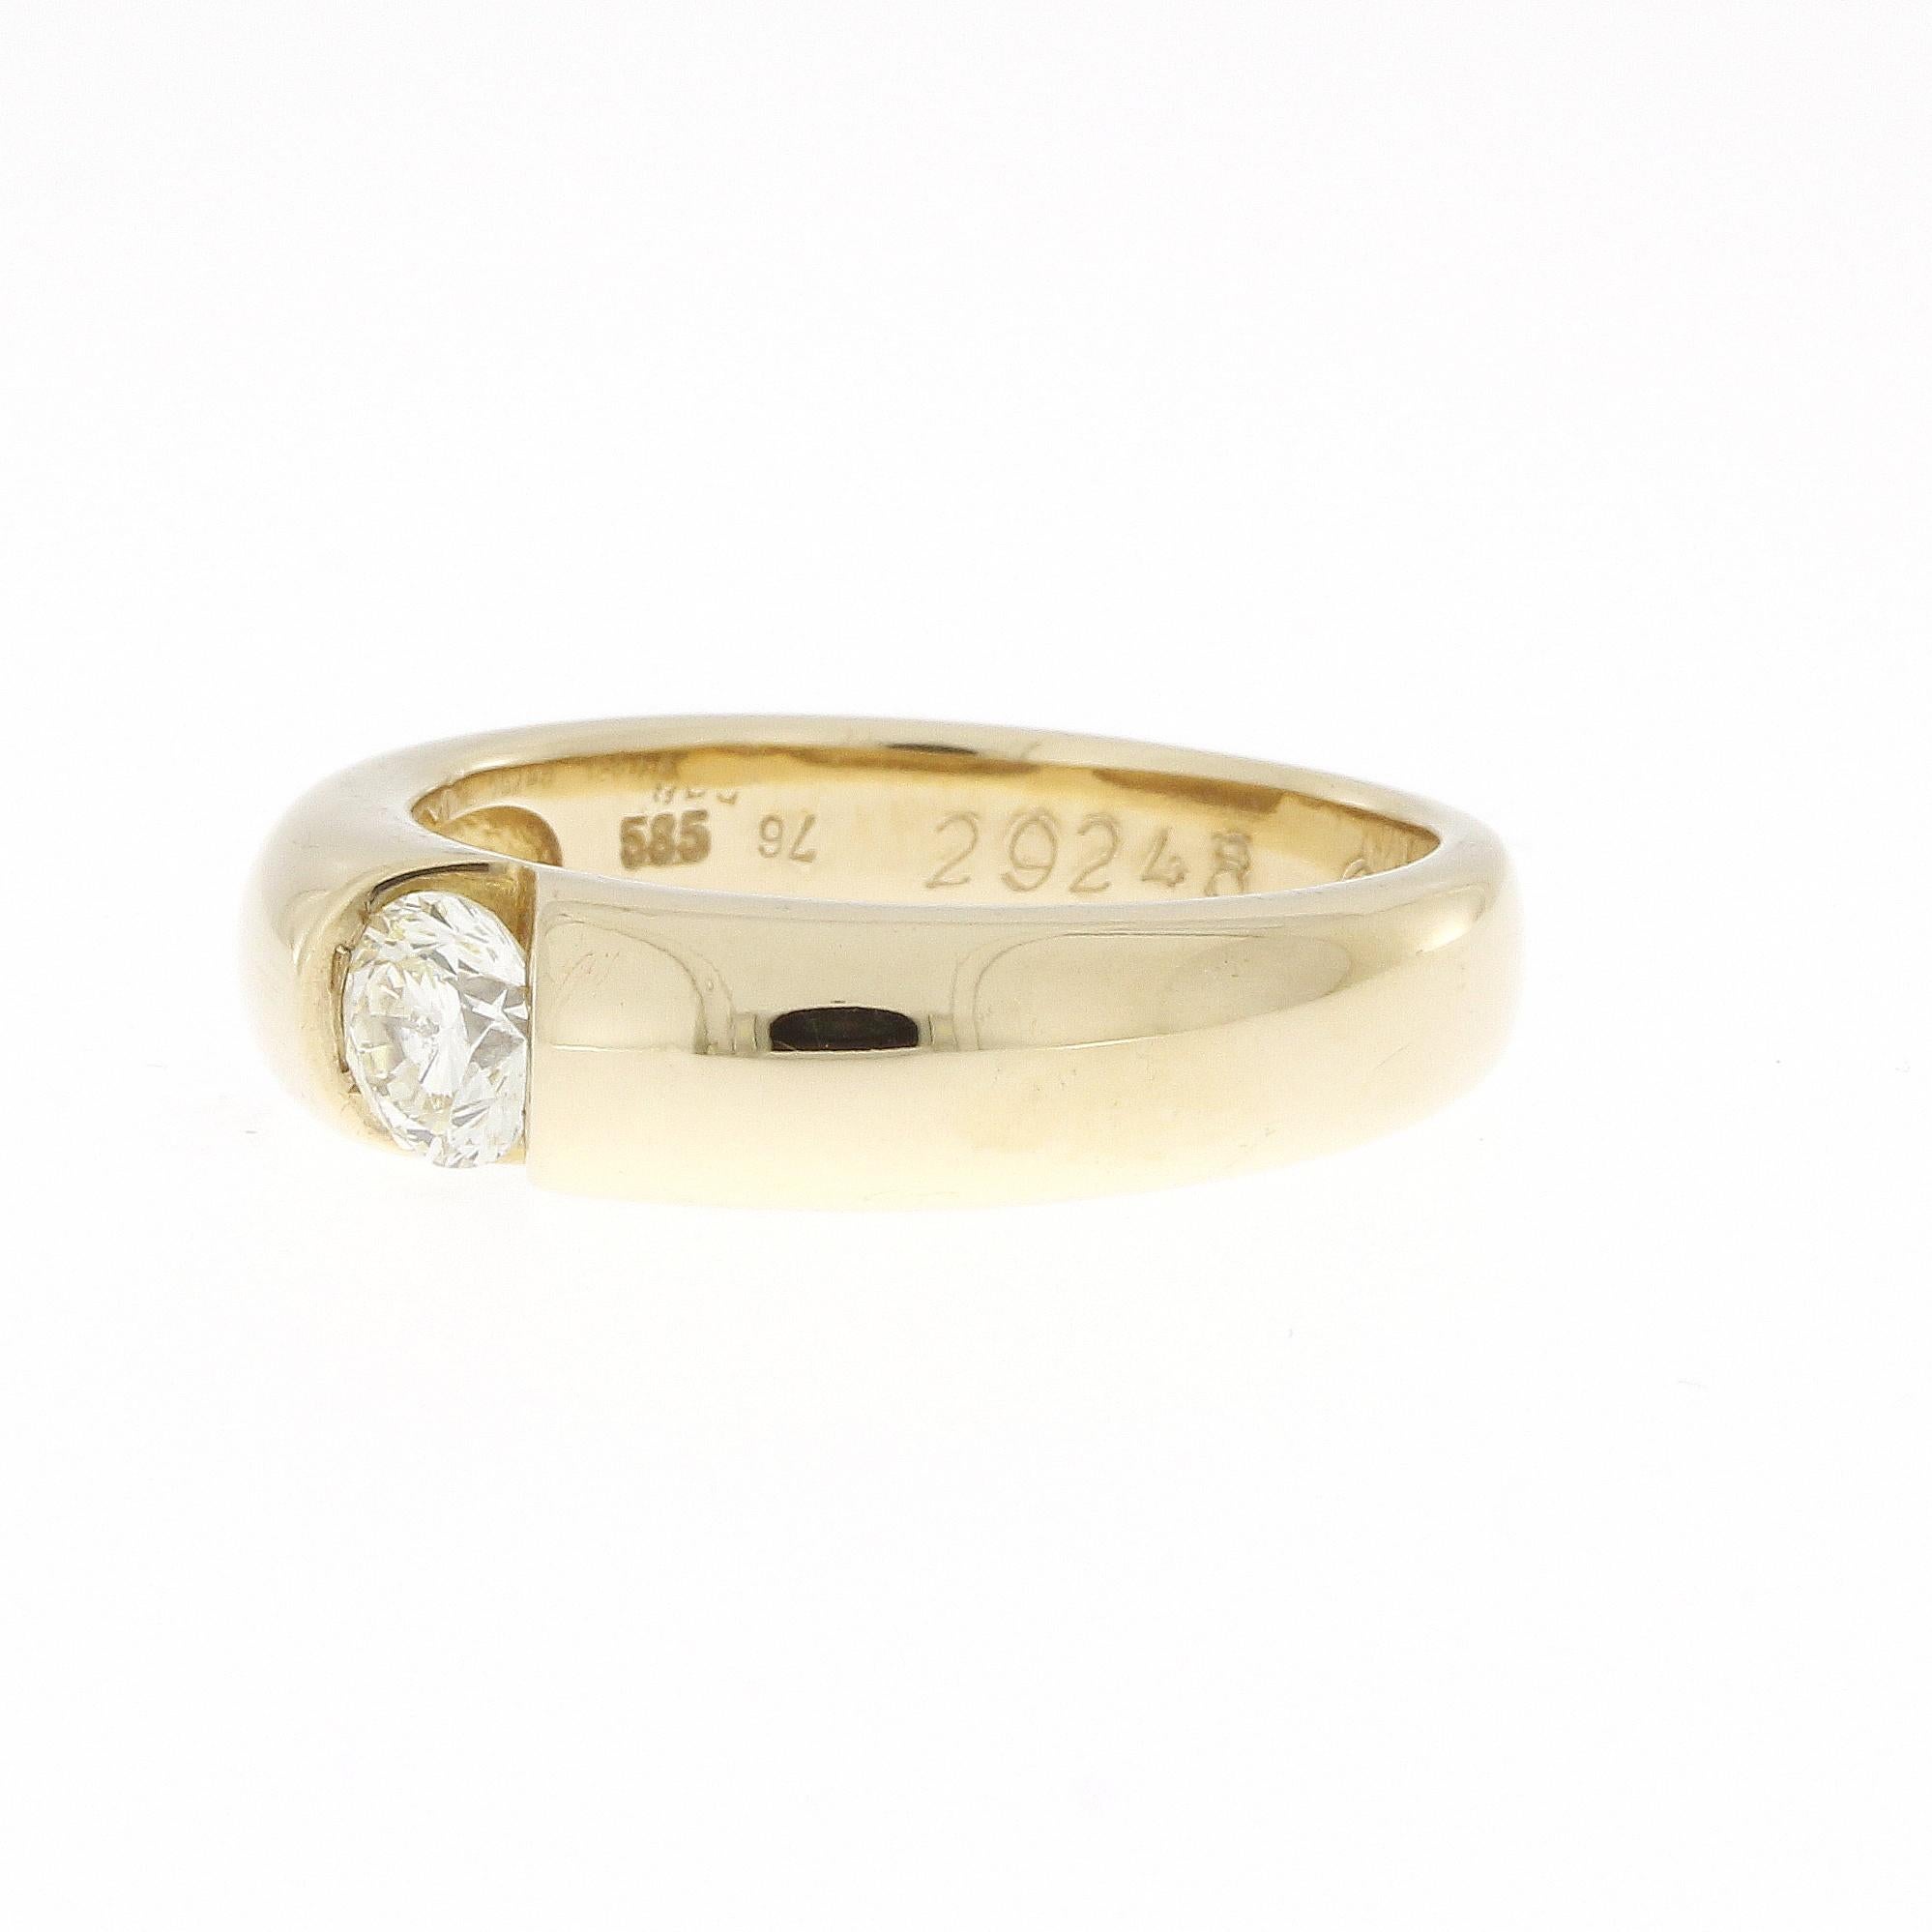 0.54 Carat Solitaire Diamond Unisex Ring in 14k Yellow Gold
Clarity: vs
Size: 60